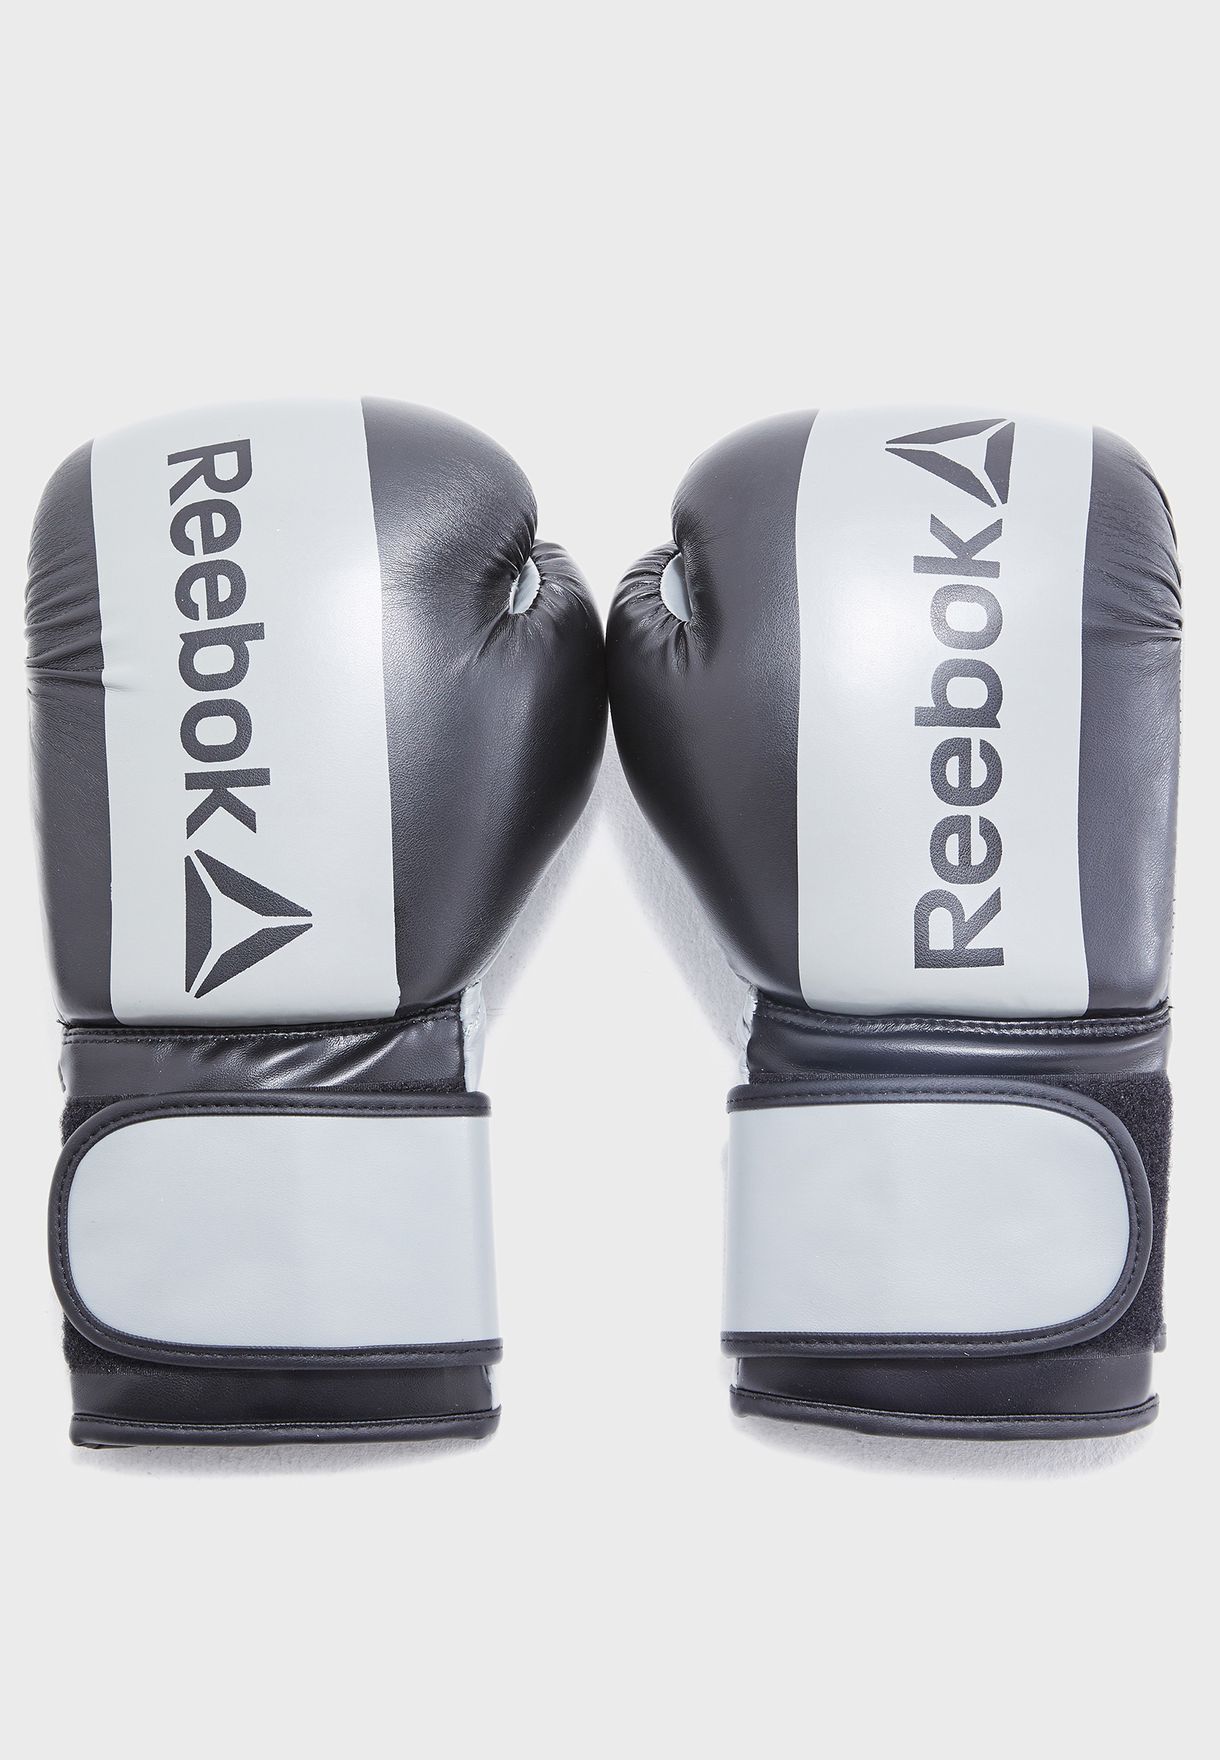 reebok lace up boxing gloves